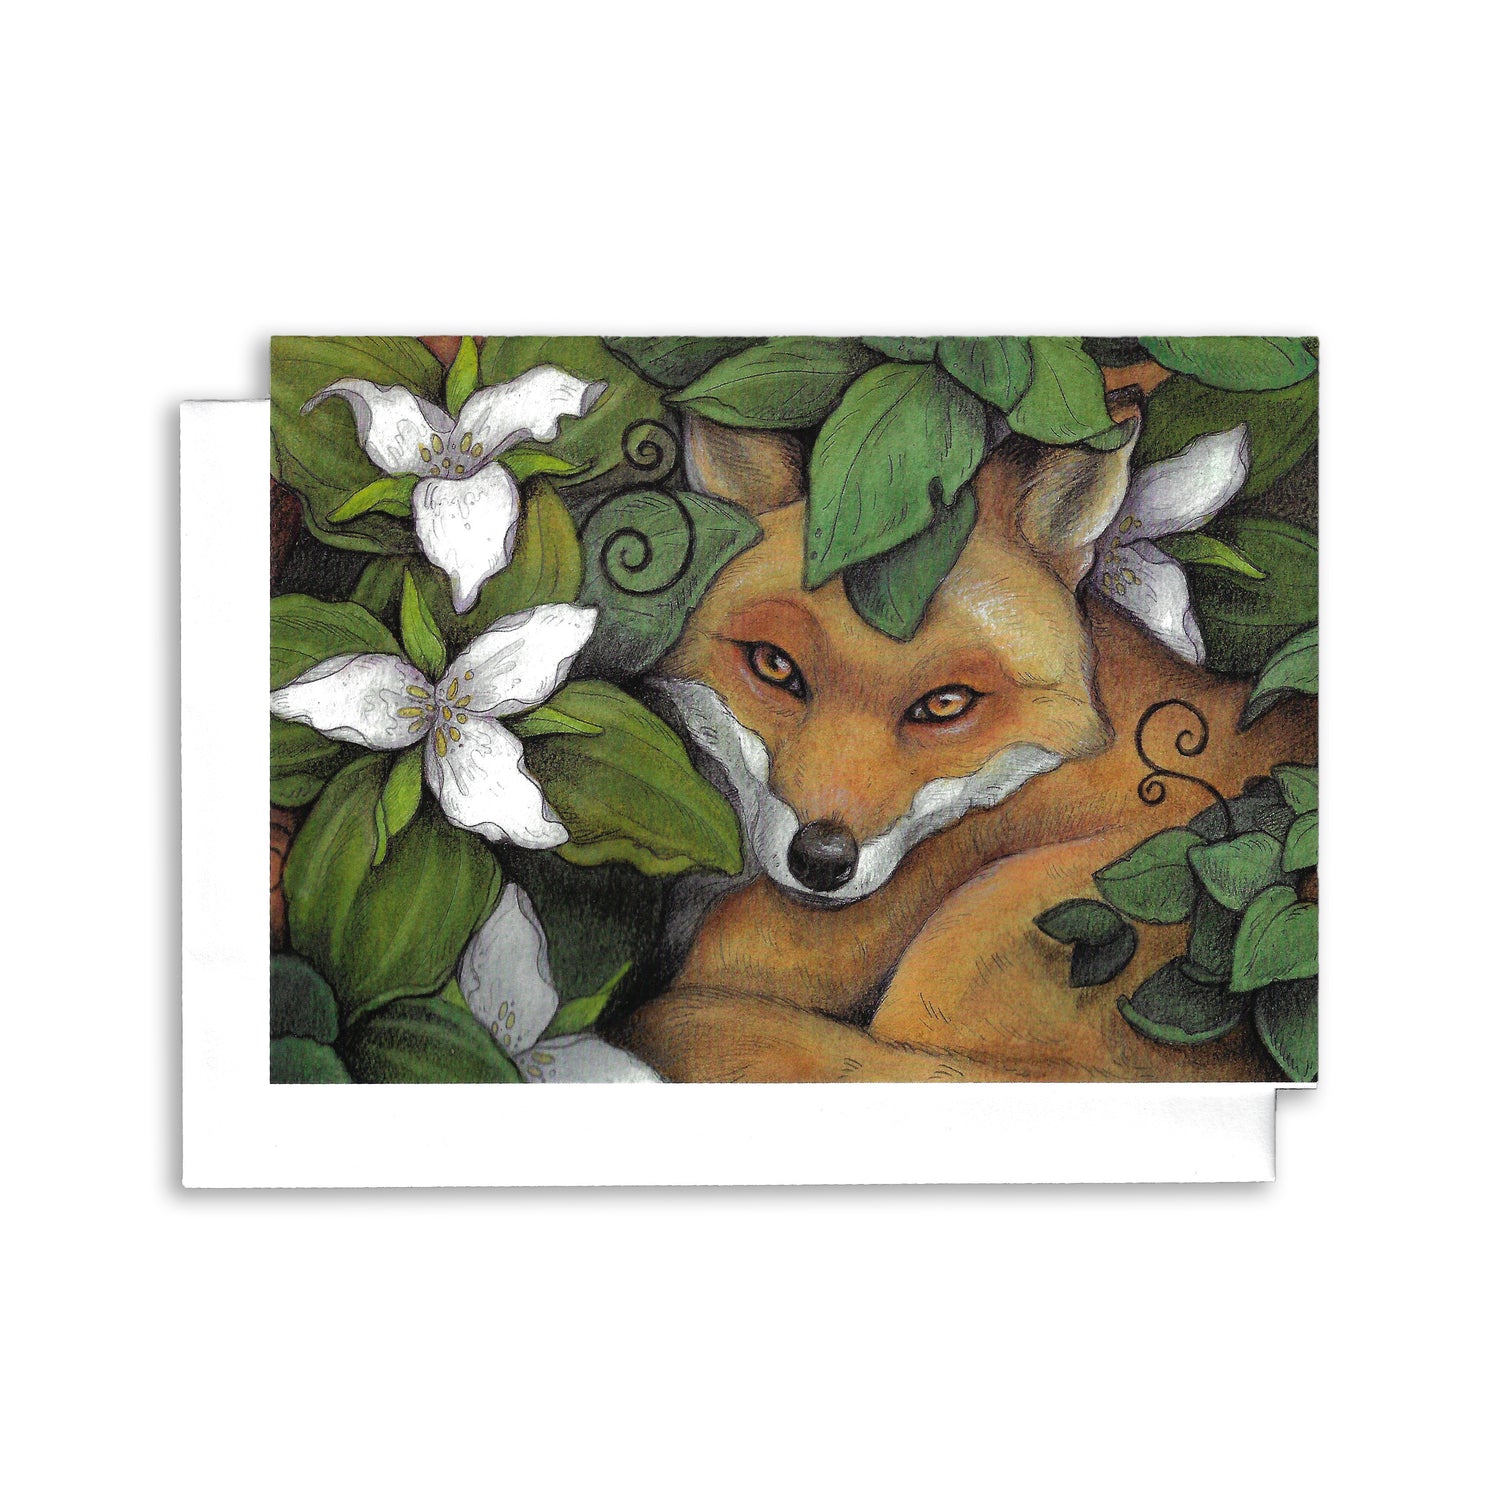 An illustrated greeting card of a small fox laying in the trilliums.